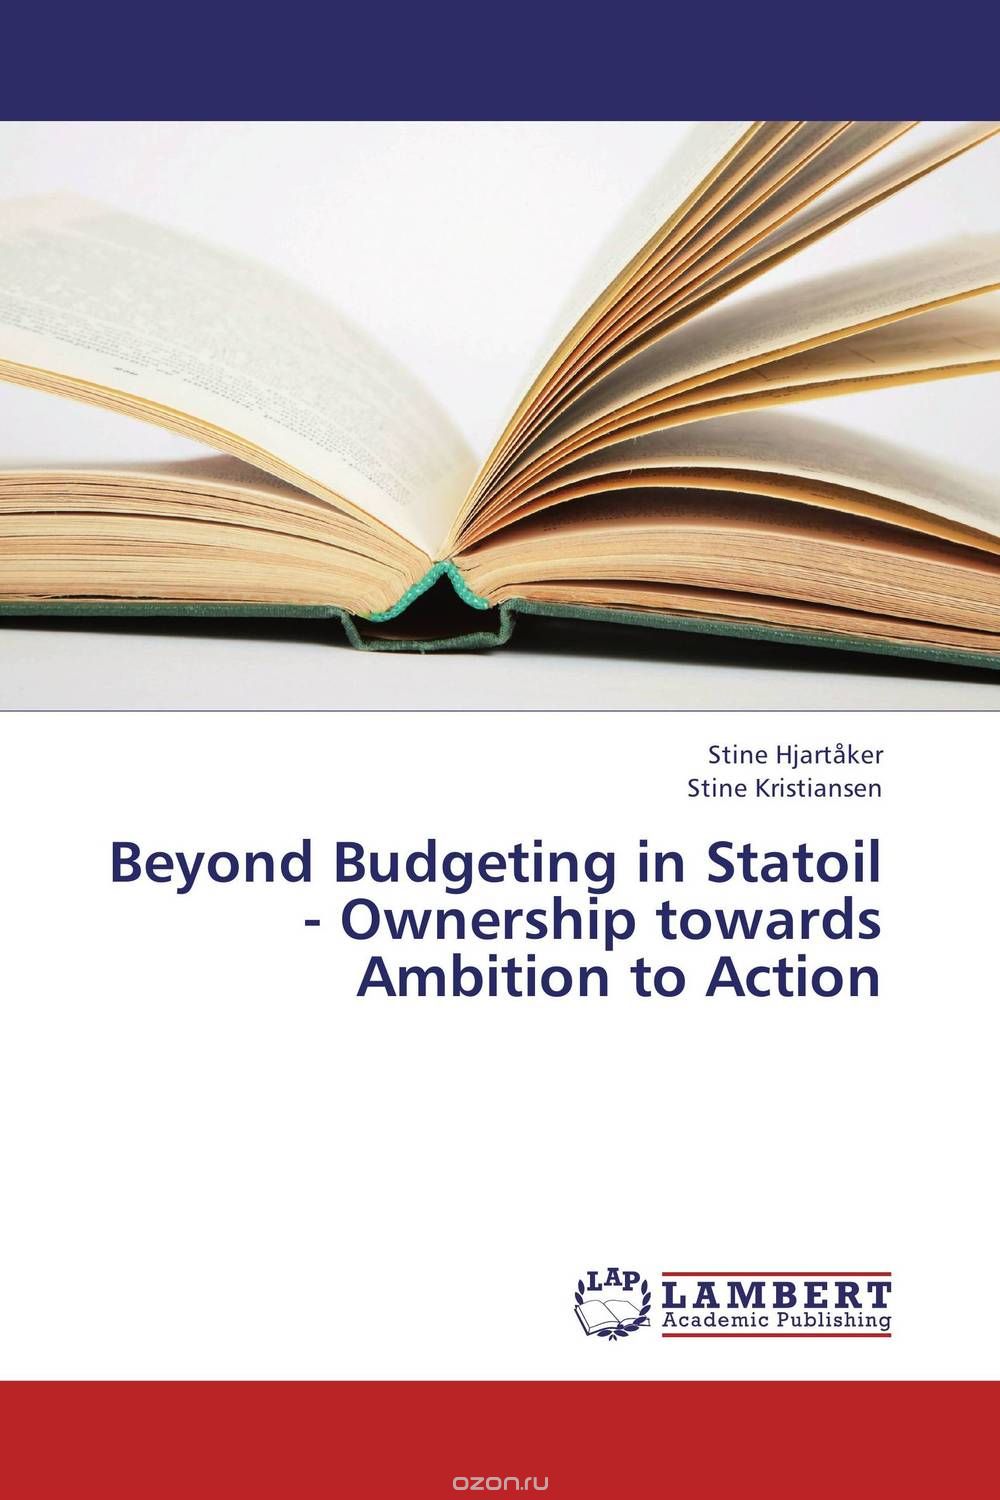 Скачать книгу "Beyond Budgeting in Statoil - Ownership towards Ambition to Action"